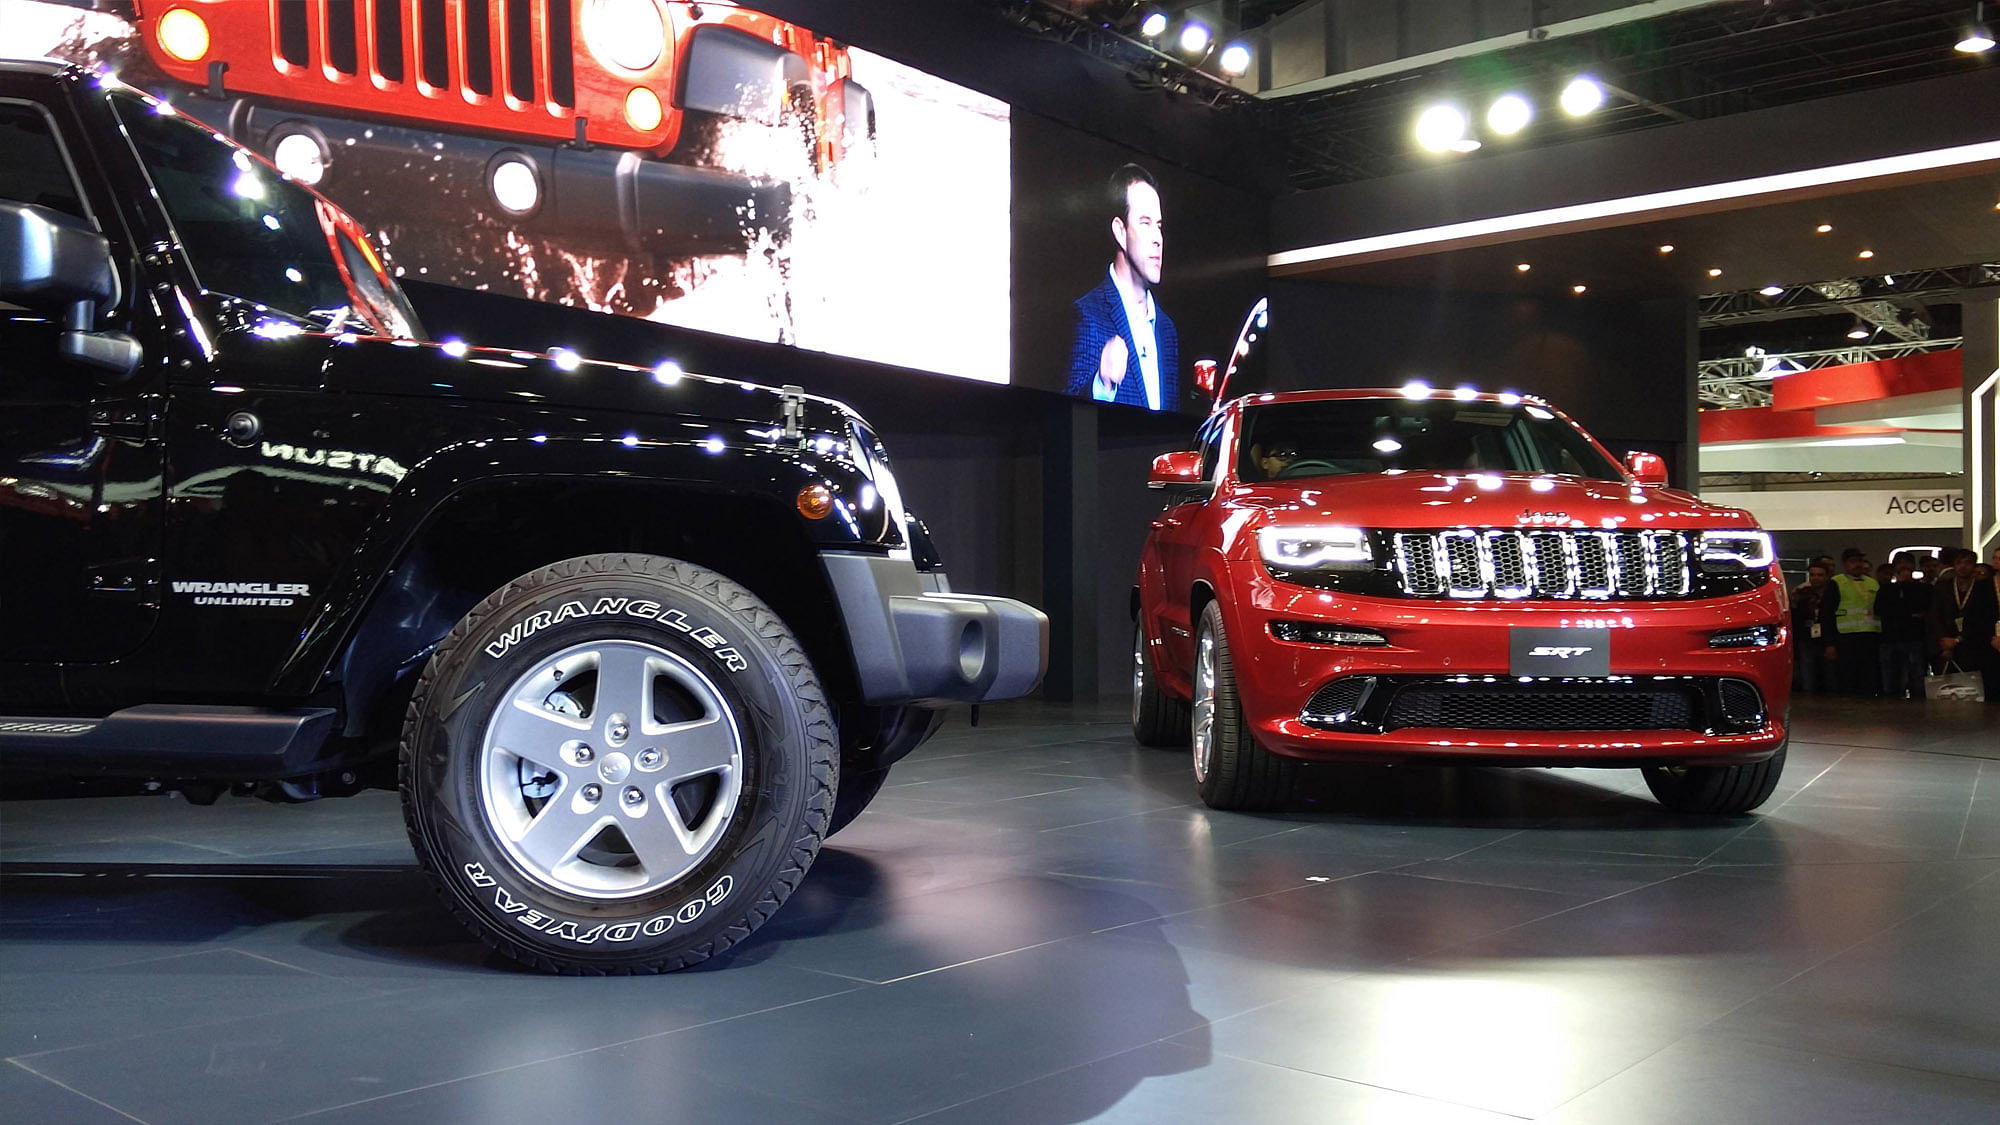 Jeep Wrangler Unlimited (Left) and Grand Cherokee SRT (Right) at Delhi Auto Expo 2016. (Photo: <b>The Quint</b>)